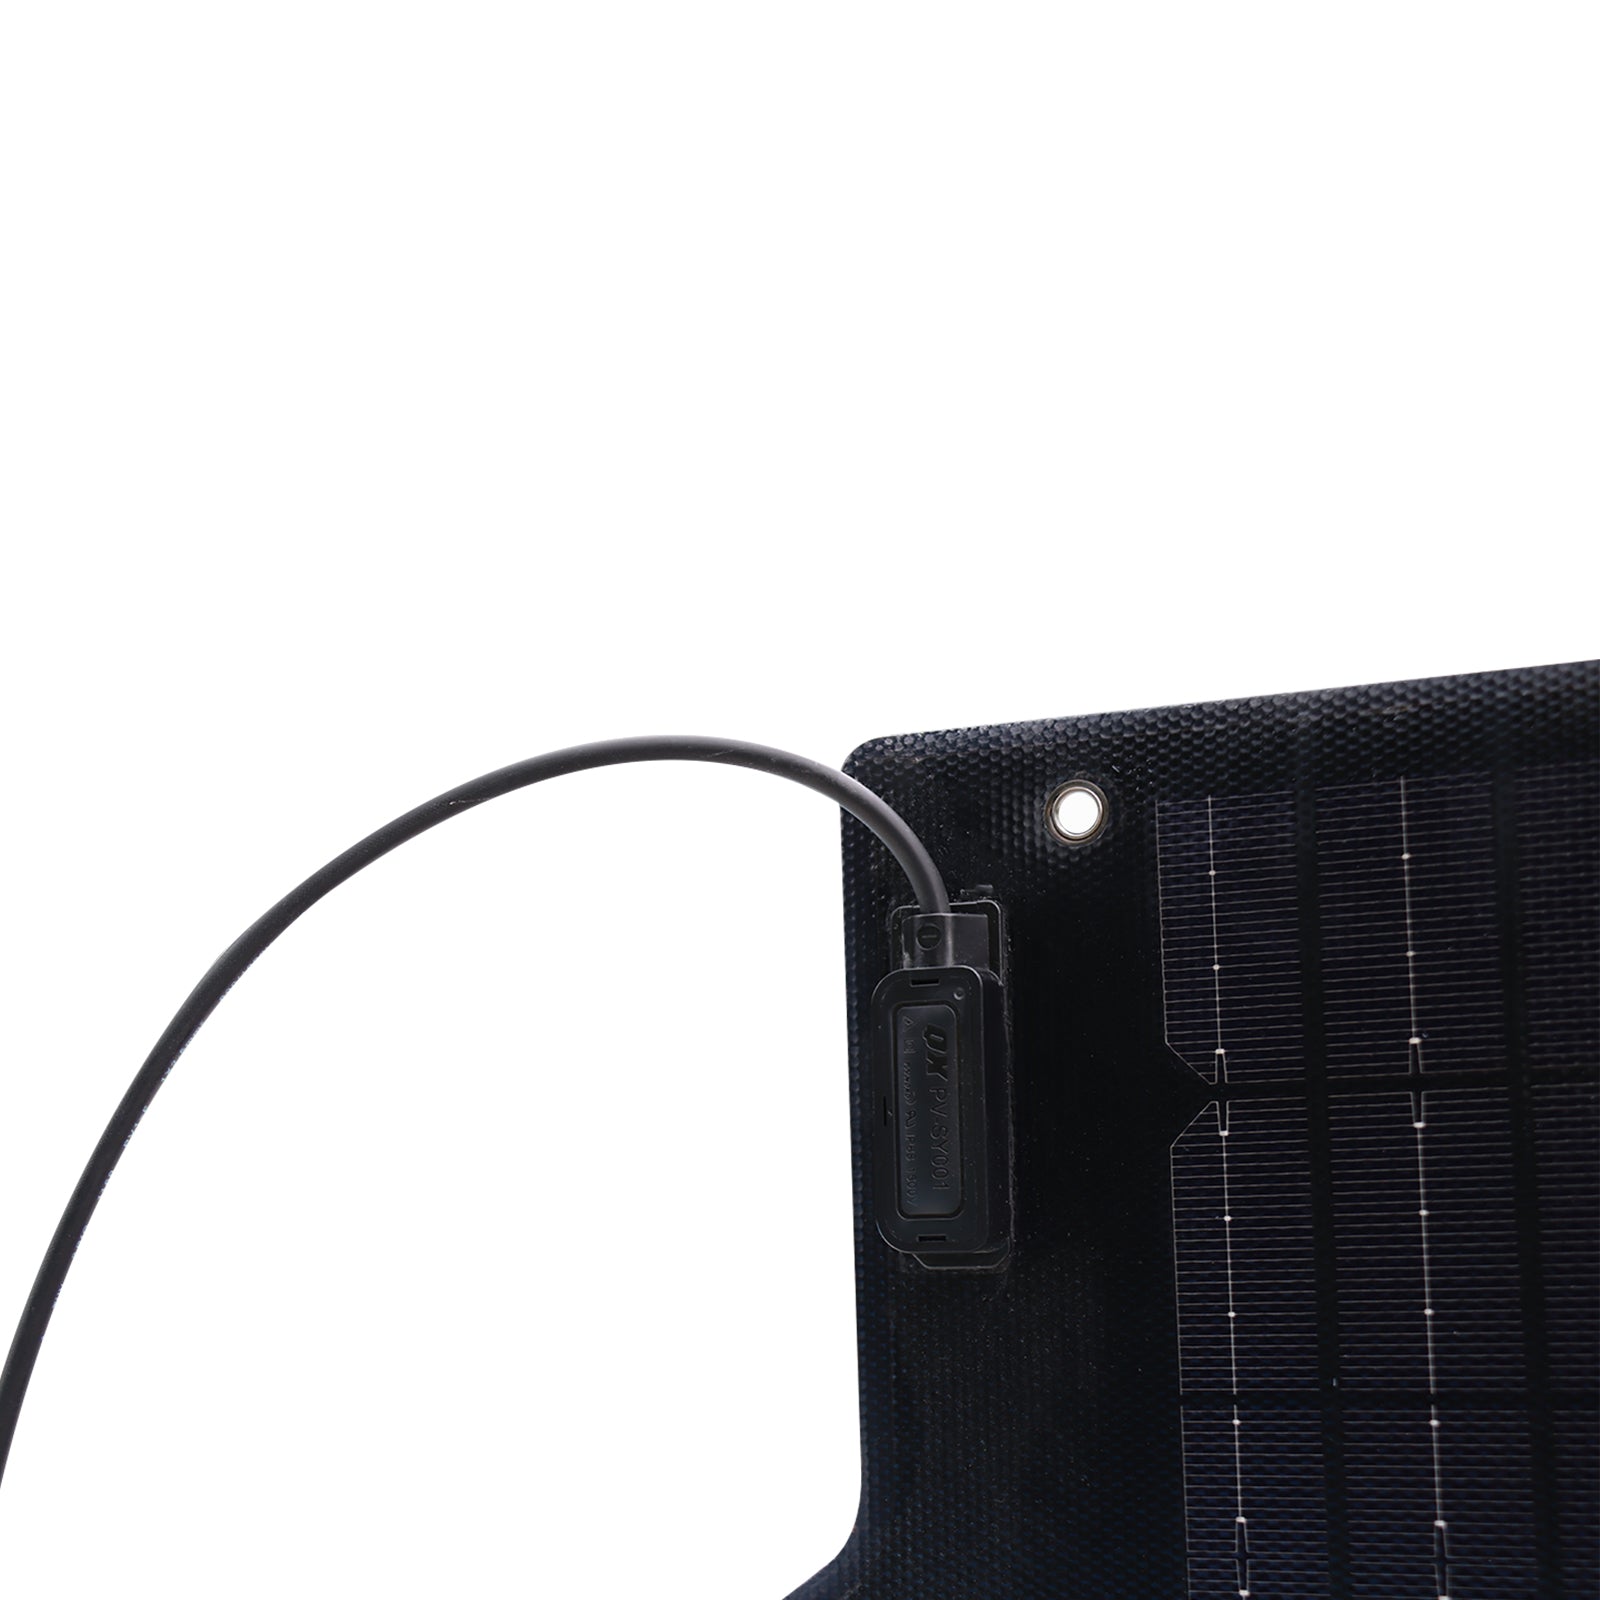 Solarparts@ Mono integrated foldable solar charger 19.8V/200W 665*614*40mm